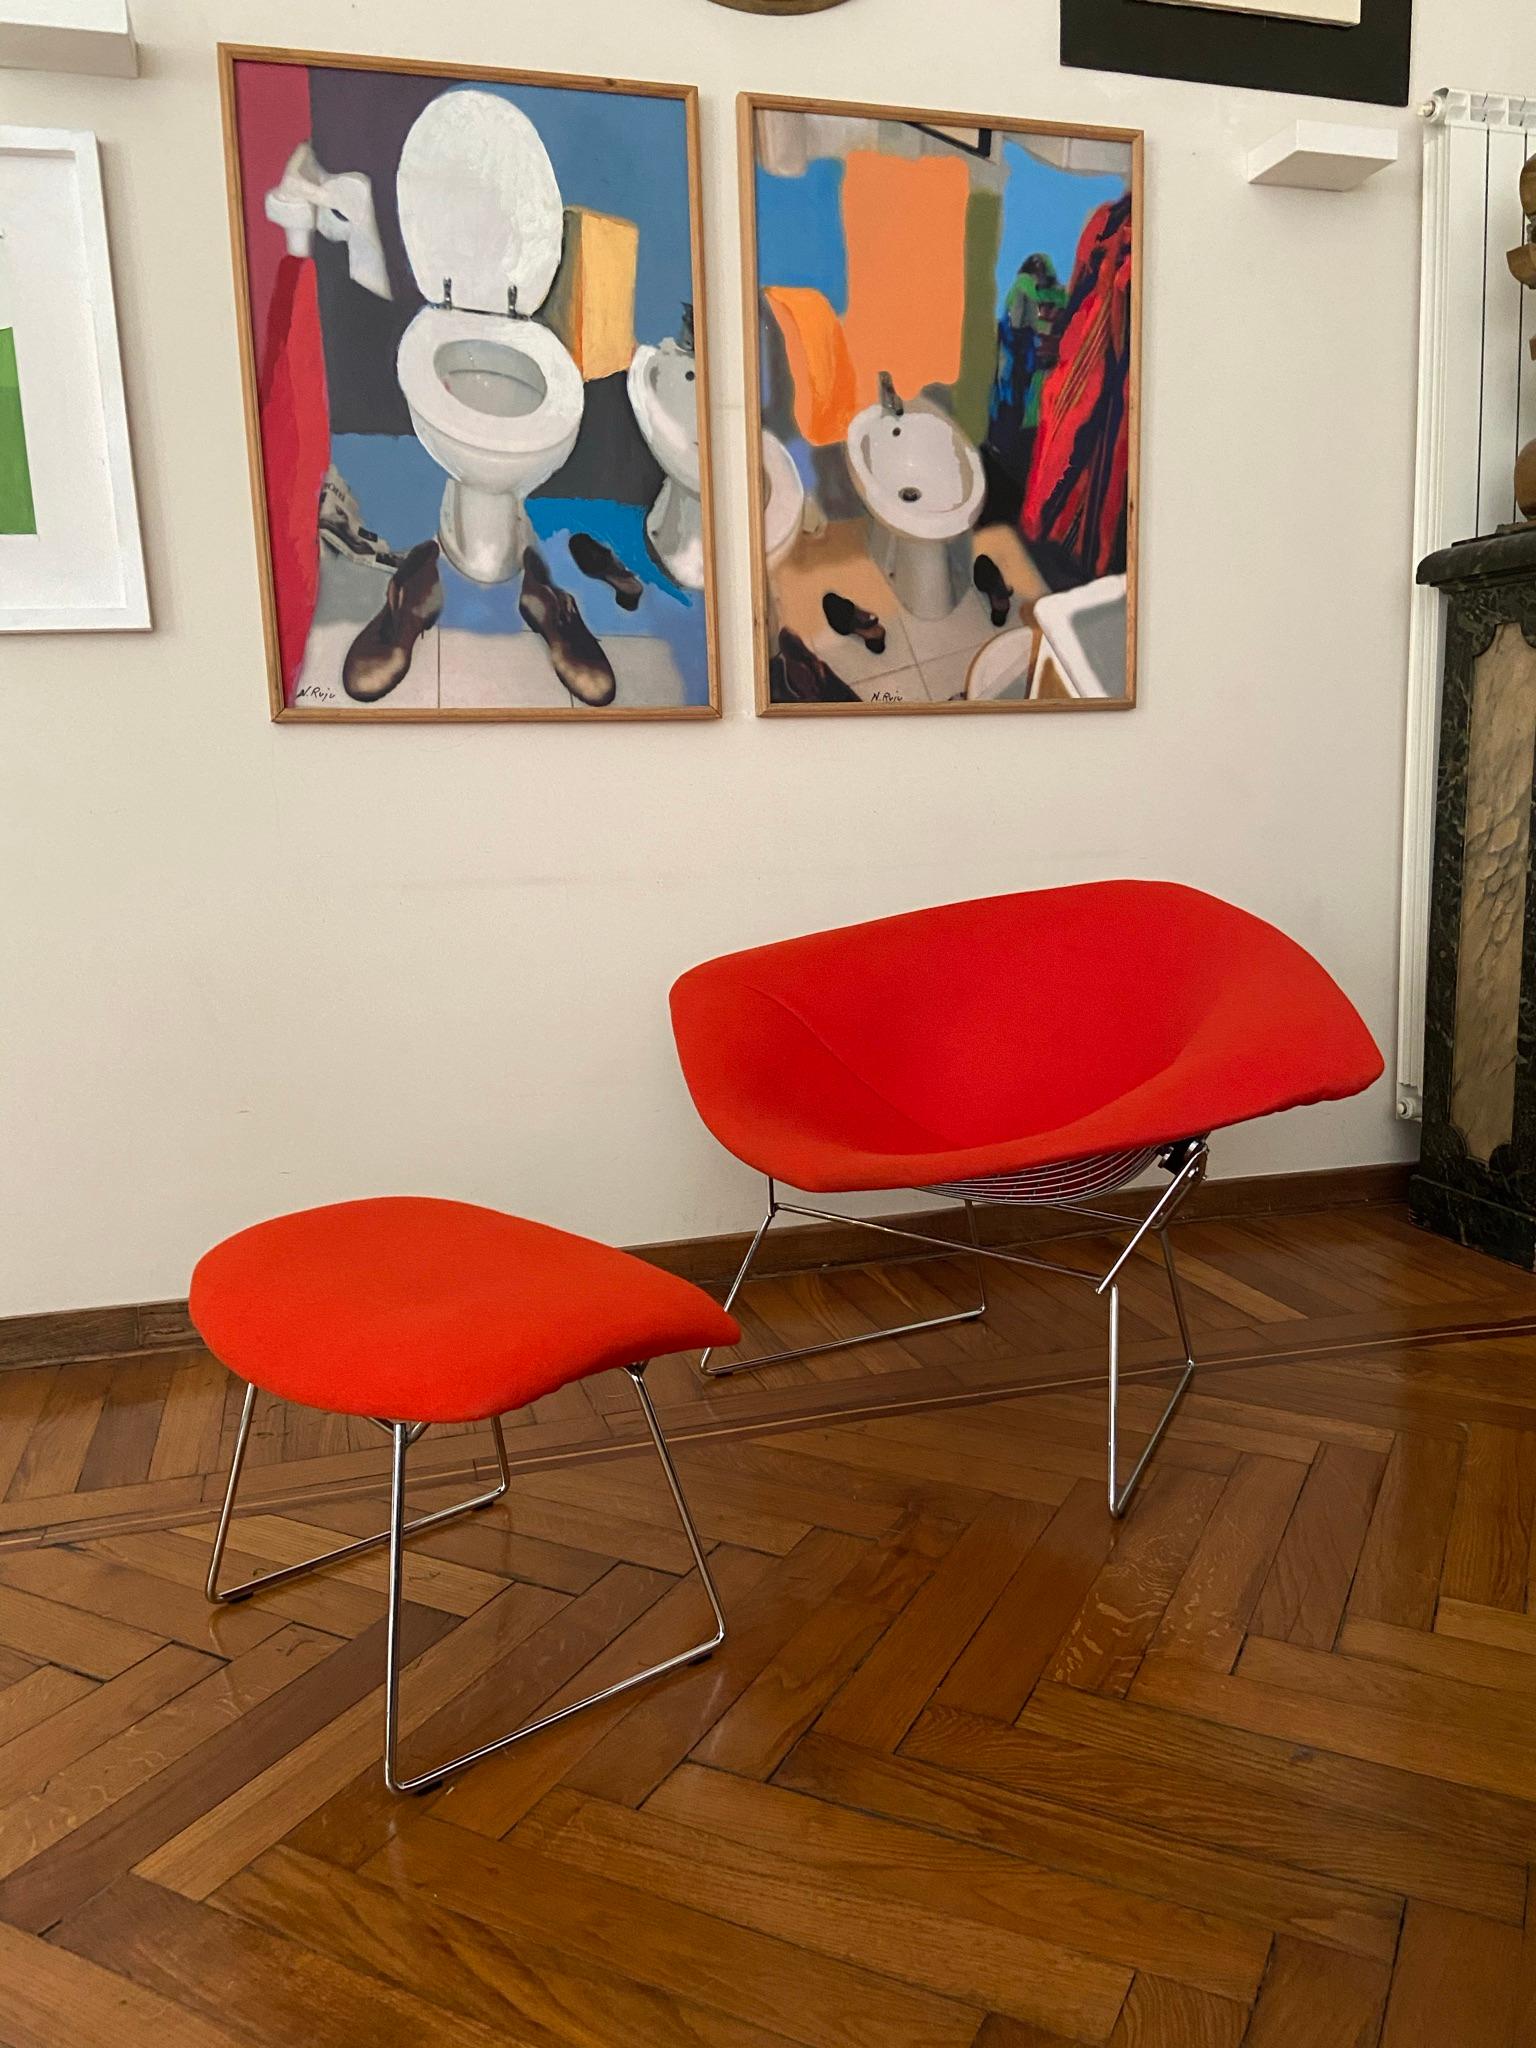 The diamond chair is an astounding study in space, form and function by one of the master sculptors of the last century. Like Saarinen and Mies, Bertoia found sublime grace in an Industrial material, elevating it beyond its normal utility into a